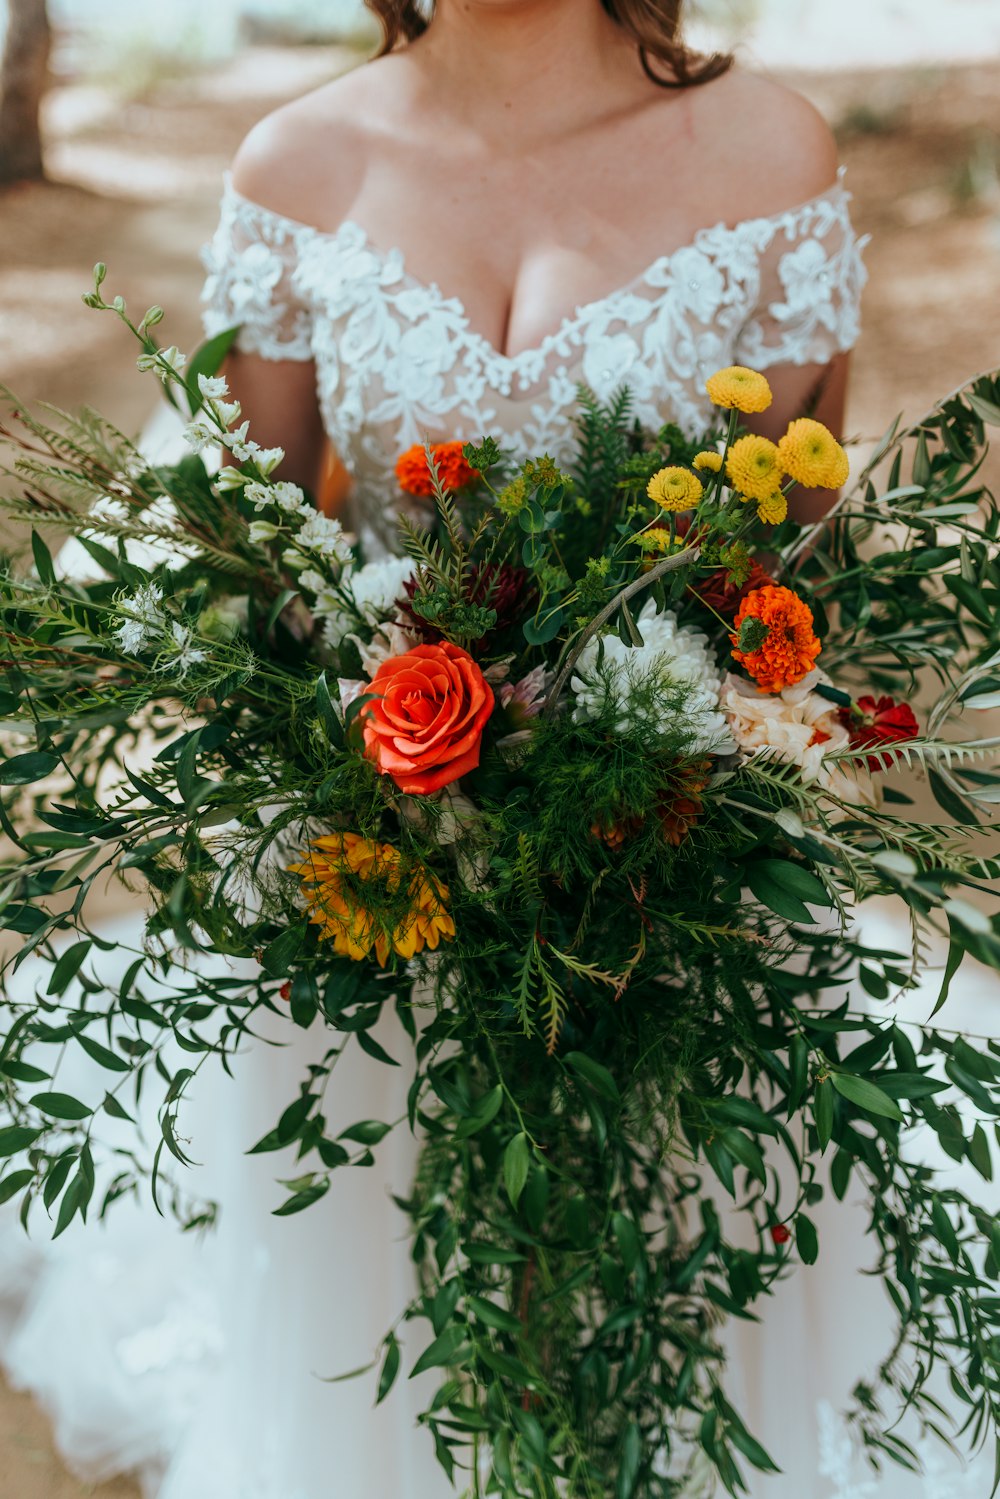 a woman in a wedding dress holding a bouquet of flowers